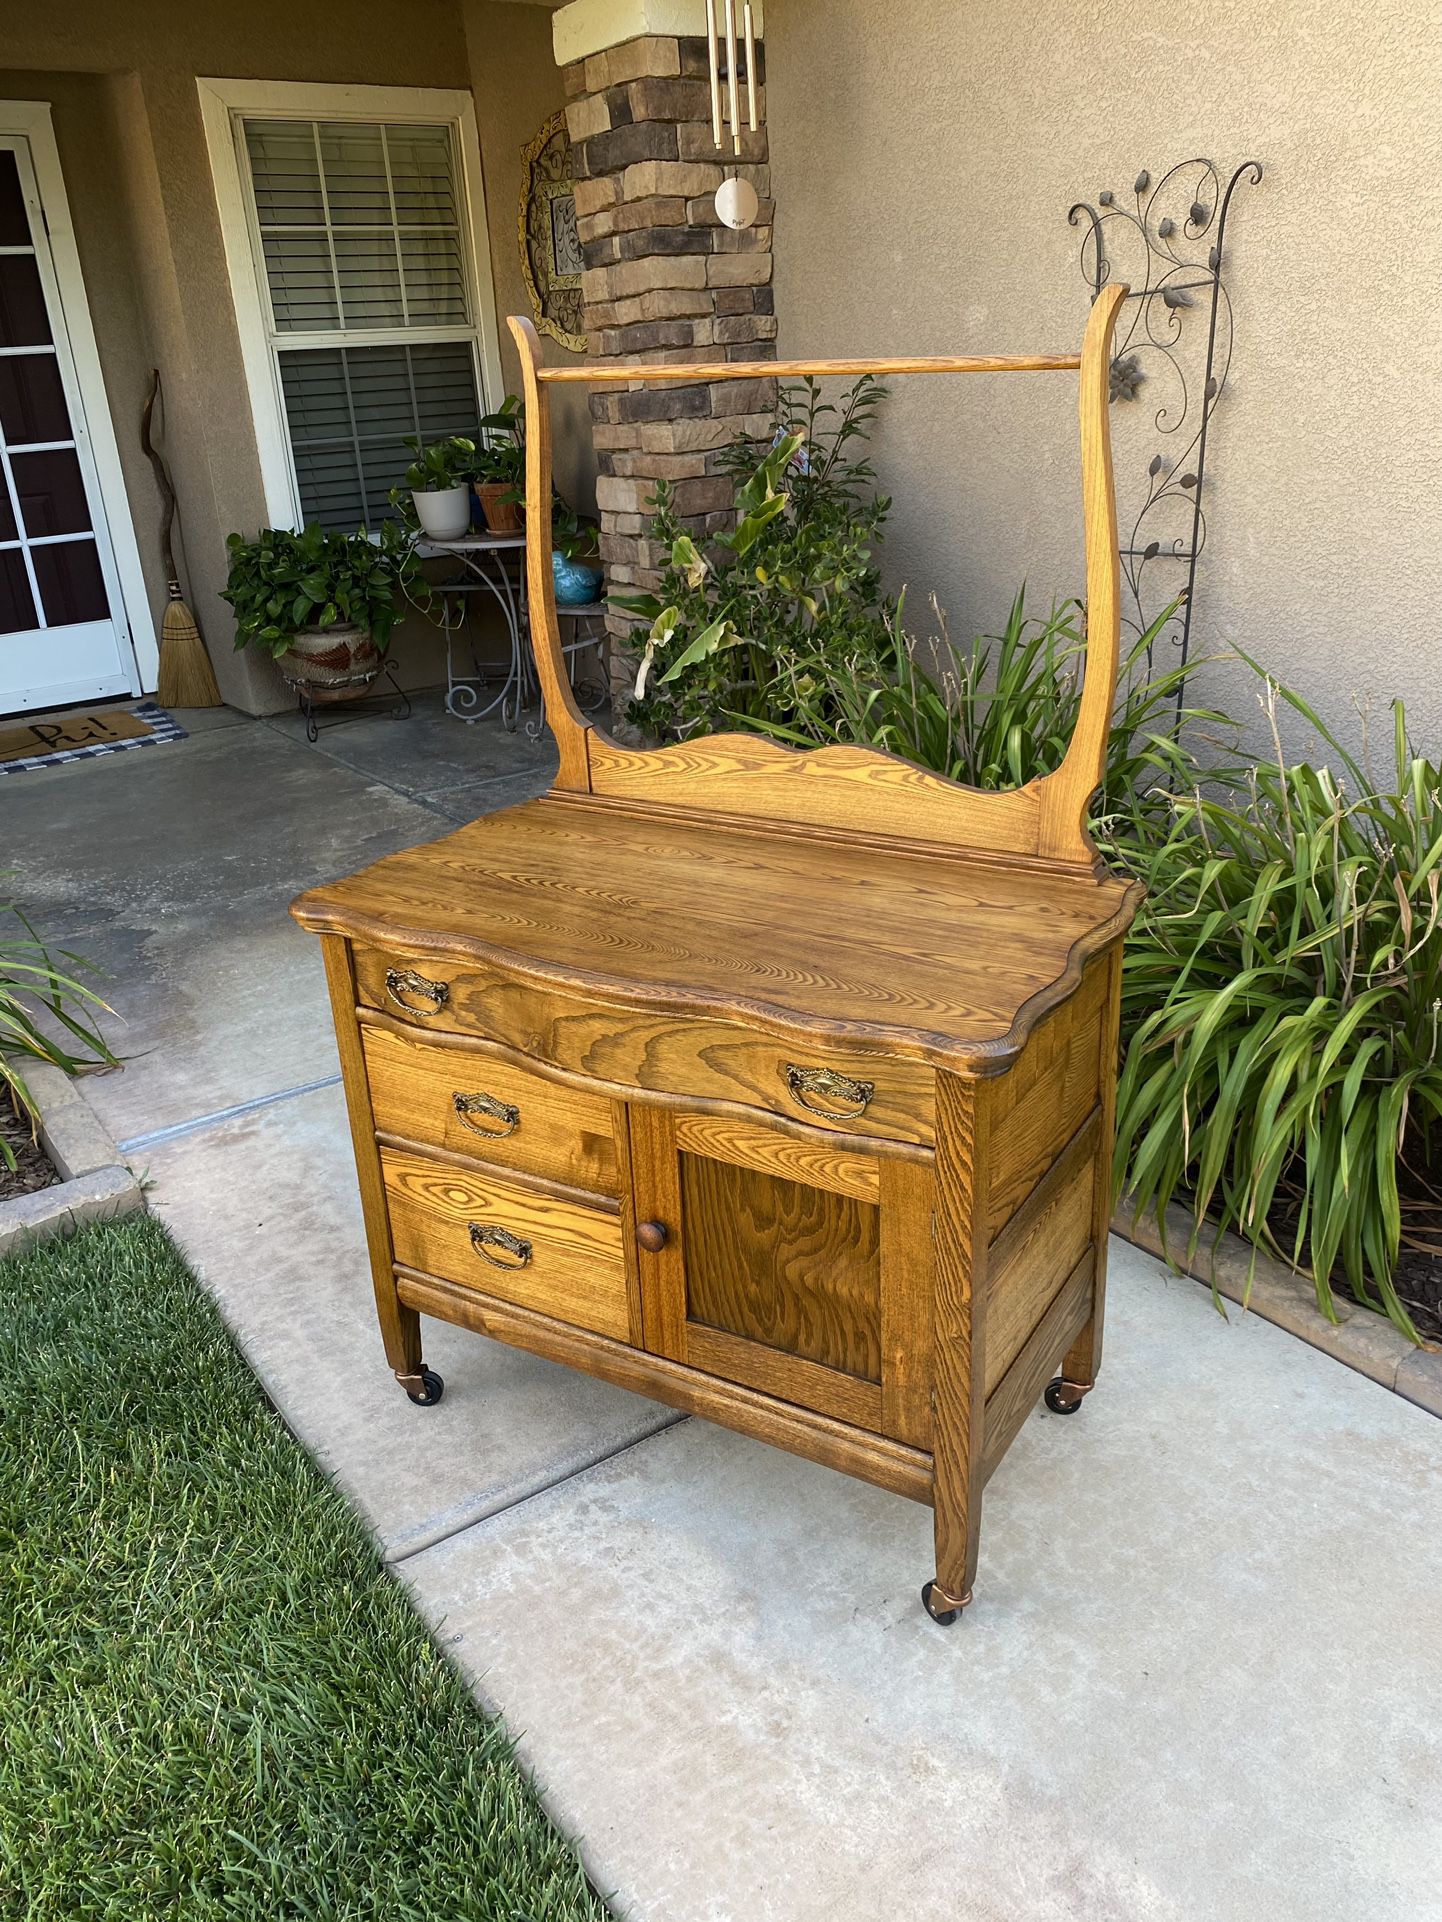 ANTIQUE “SNIDECOR & CO” 2PC. OAK WASHSTAND / COFFEE-BAR STATION / VANITY W/ CASTER WHEELS (DATED1913’) 36”W X 19”D X 55”H (30”H TABLE TOP)